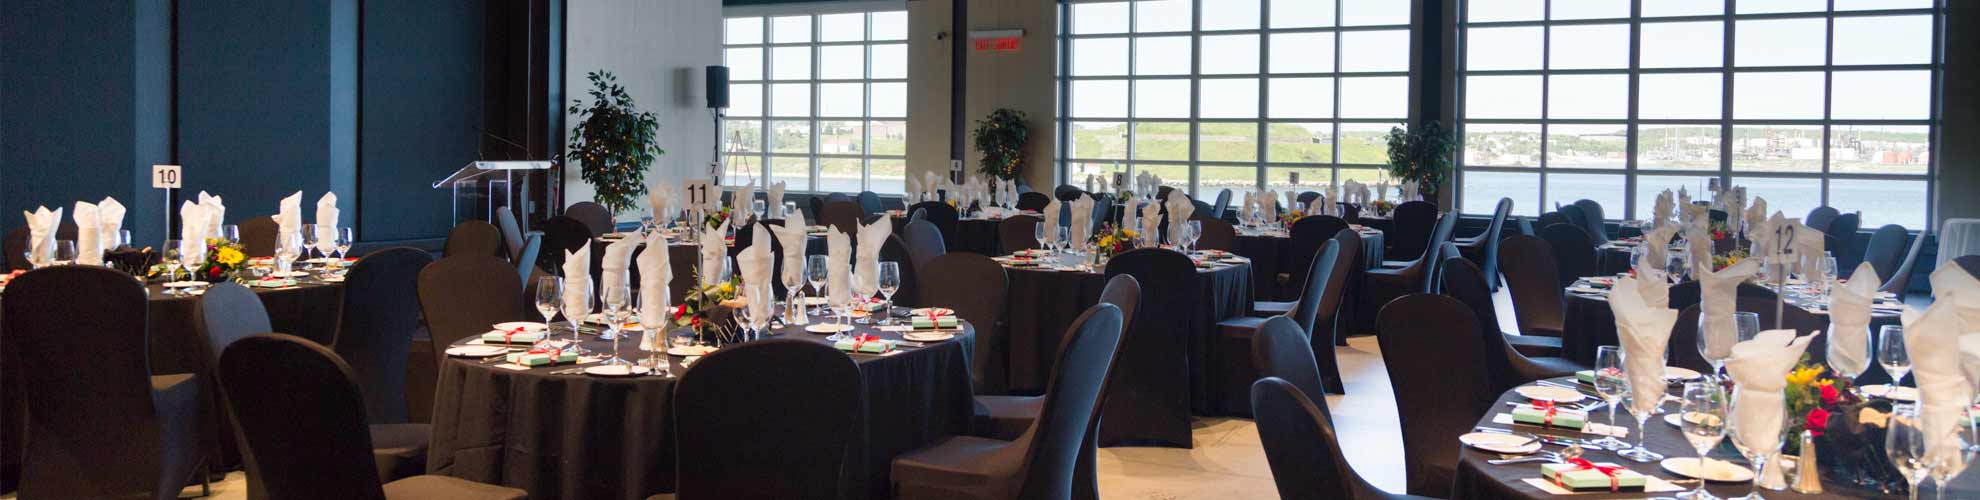 A room with floor to ceiling windows offering a view of the harbour and island and oval banquet tables and chairs set with dining wares.